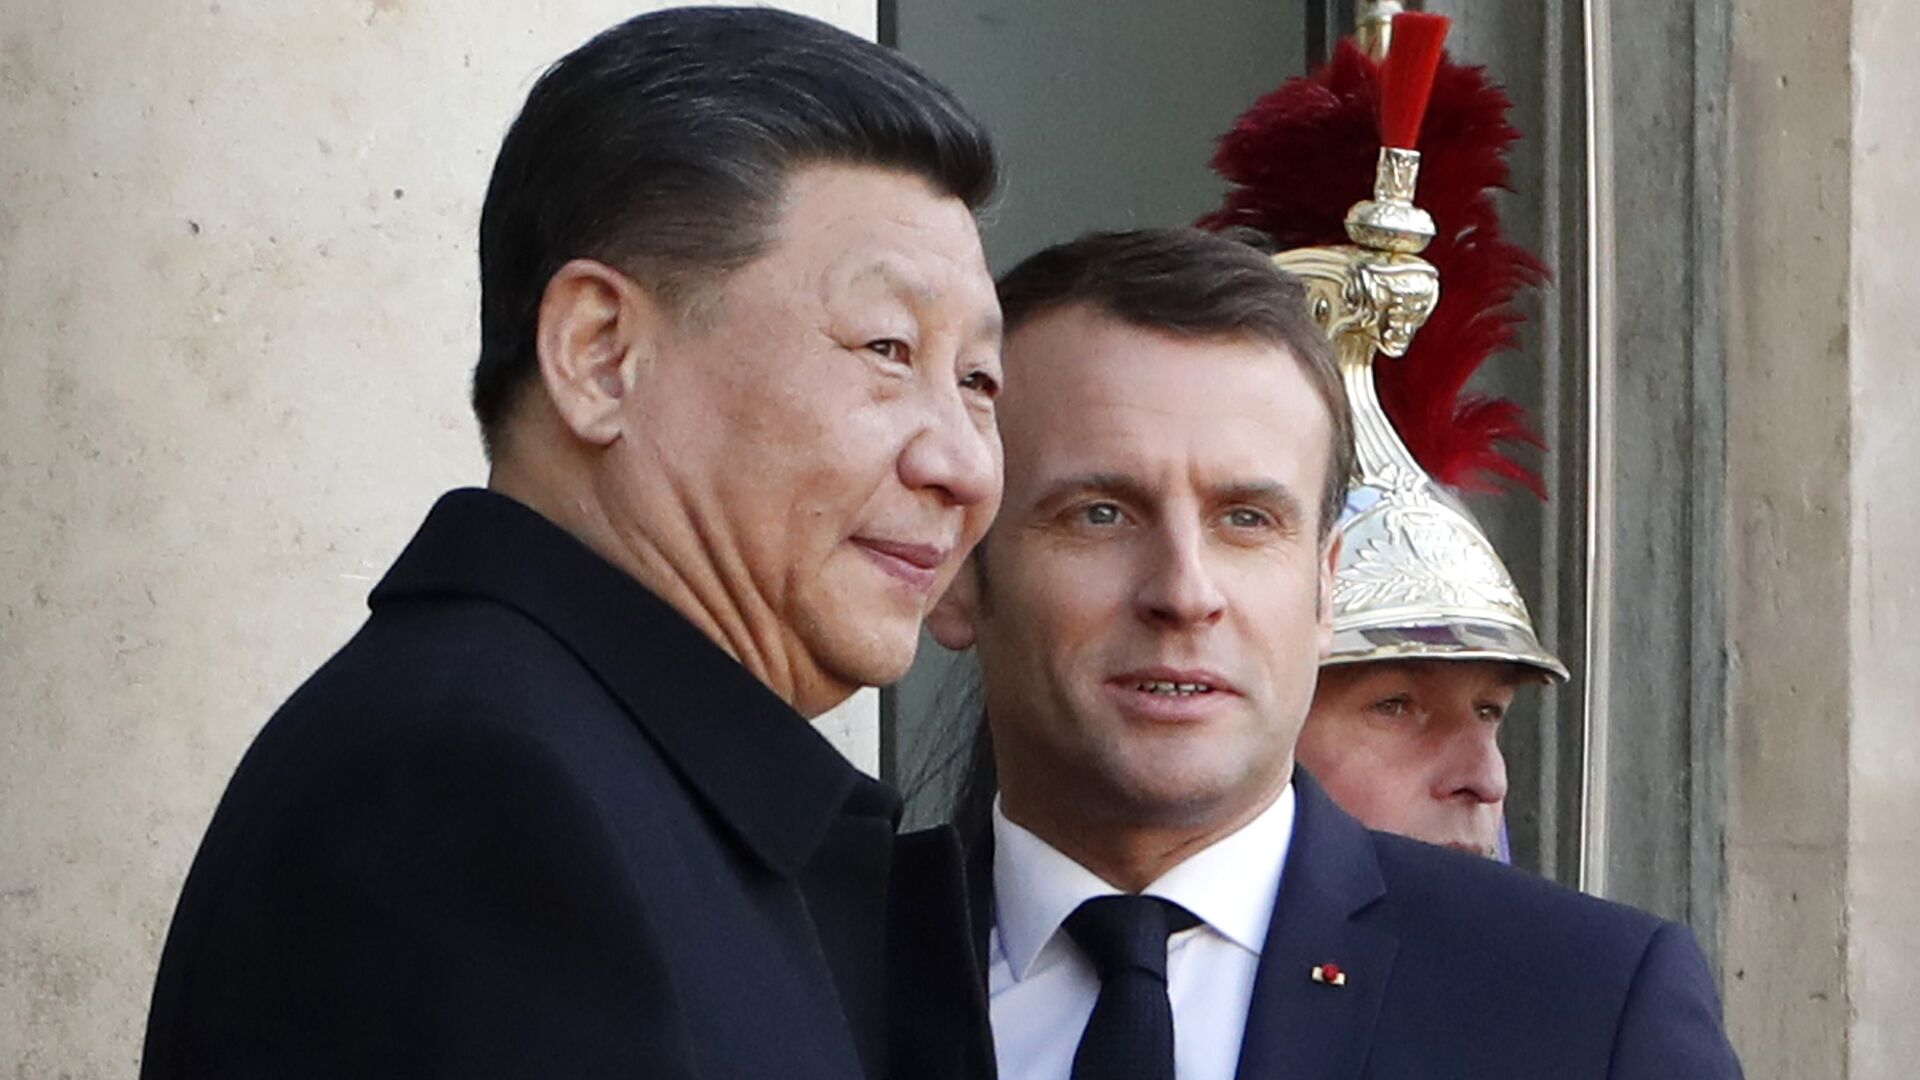 French President Emmanuel Macron, right, welcomes his Chinese counterpart Xi Jinping prior to a meeting at the Elysee Palace, in Paris, Monday, March 25, 2019. - Sputnik International, 1920, 17.02.2022